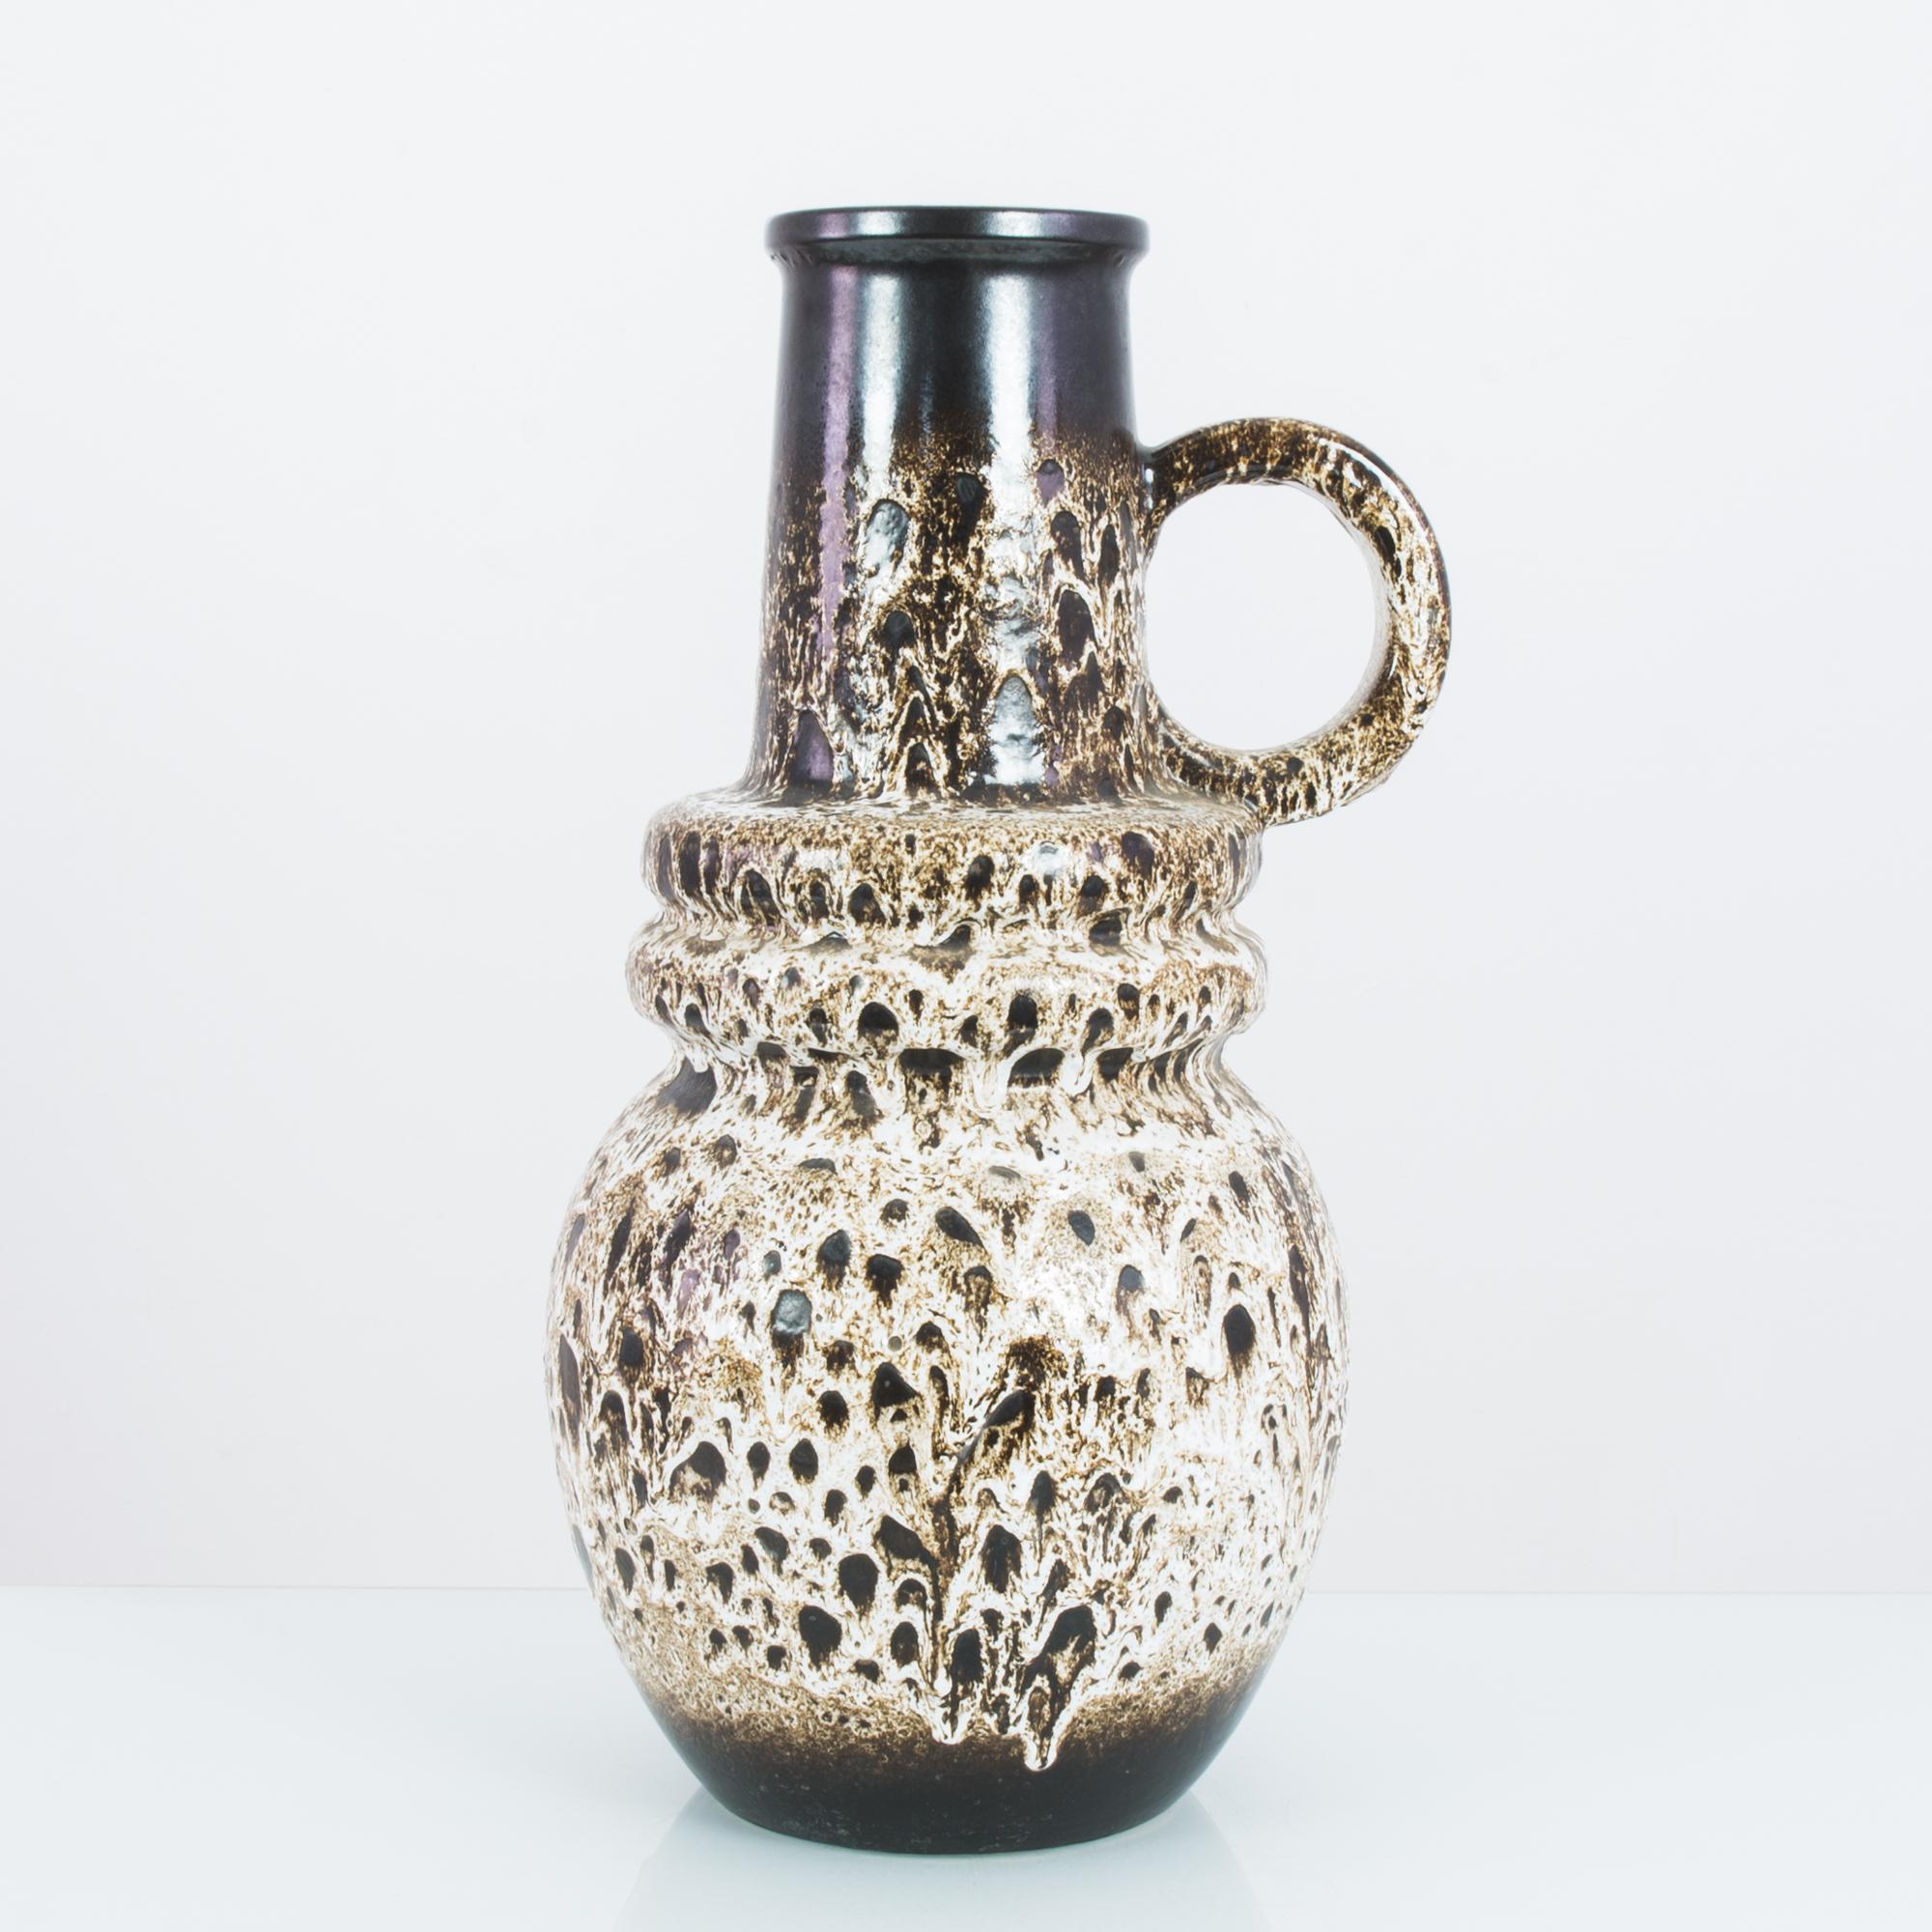 A ceramic vase from West Germany, circa 1960. A rounded and continuous shape: the bulb of the base ripples into ridges, then rises into a graceful funnel. The ceramic has a burnished tone, interrupted by a striking cream-colored glaze, which froths